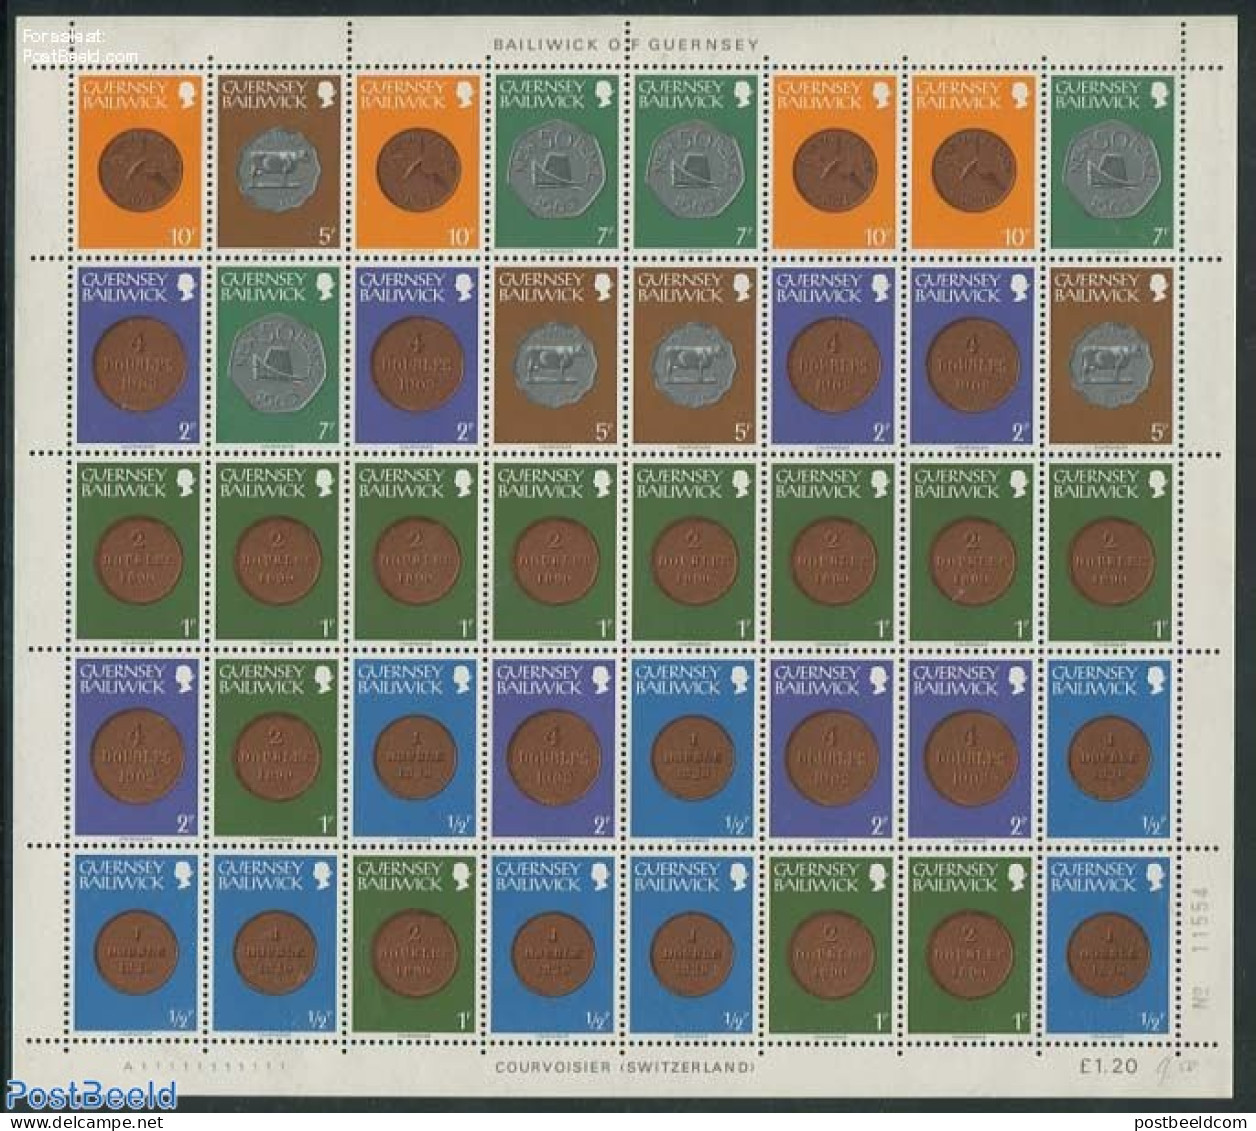 Guernsey 1980 Coins Booklet Sheet, Mint NH, Various - Money On Stamps - Coins